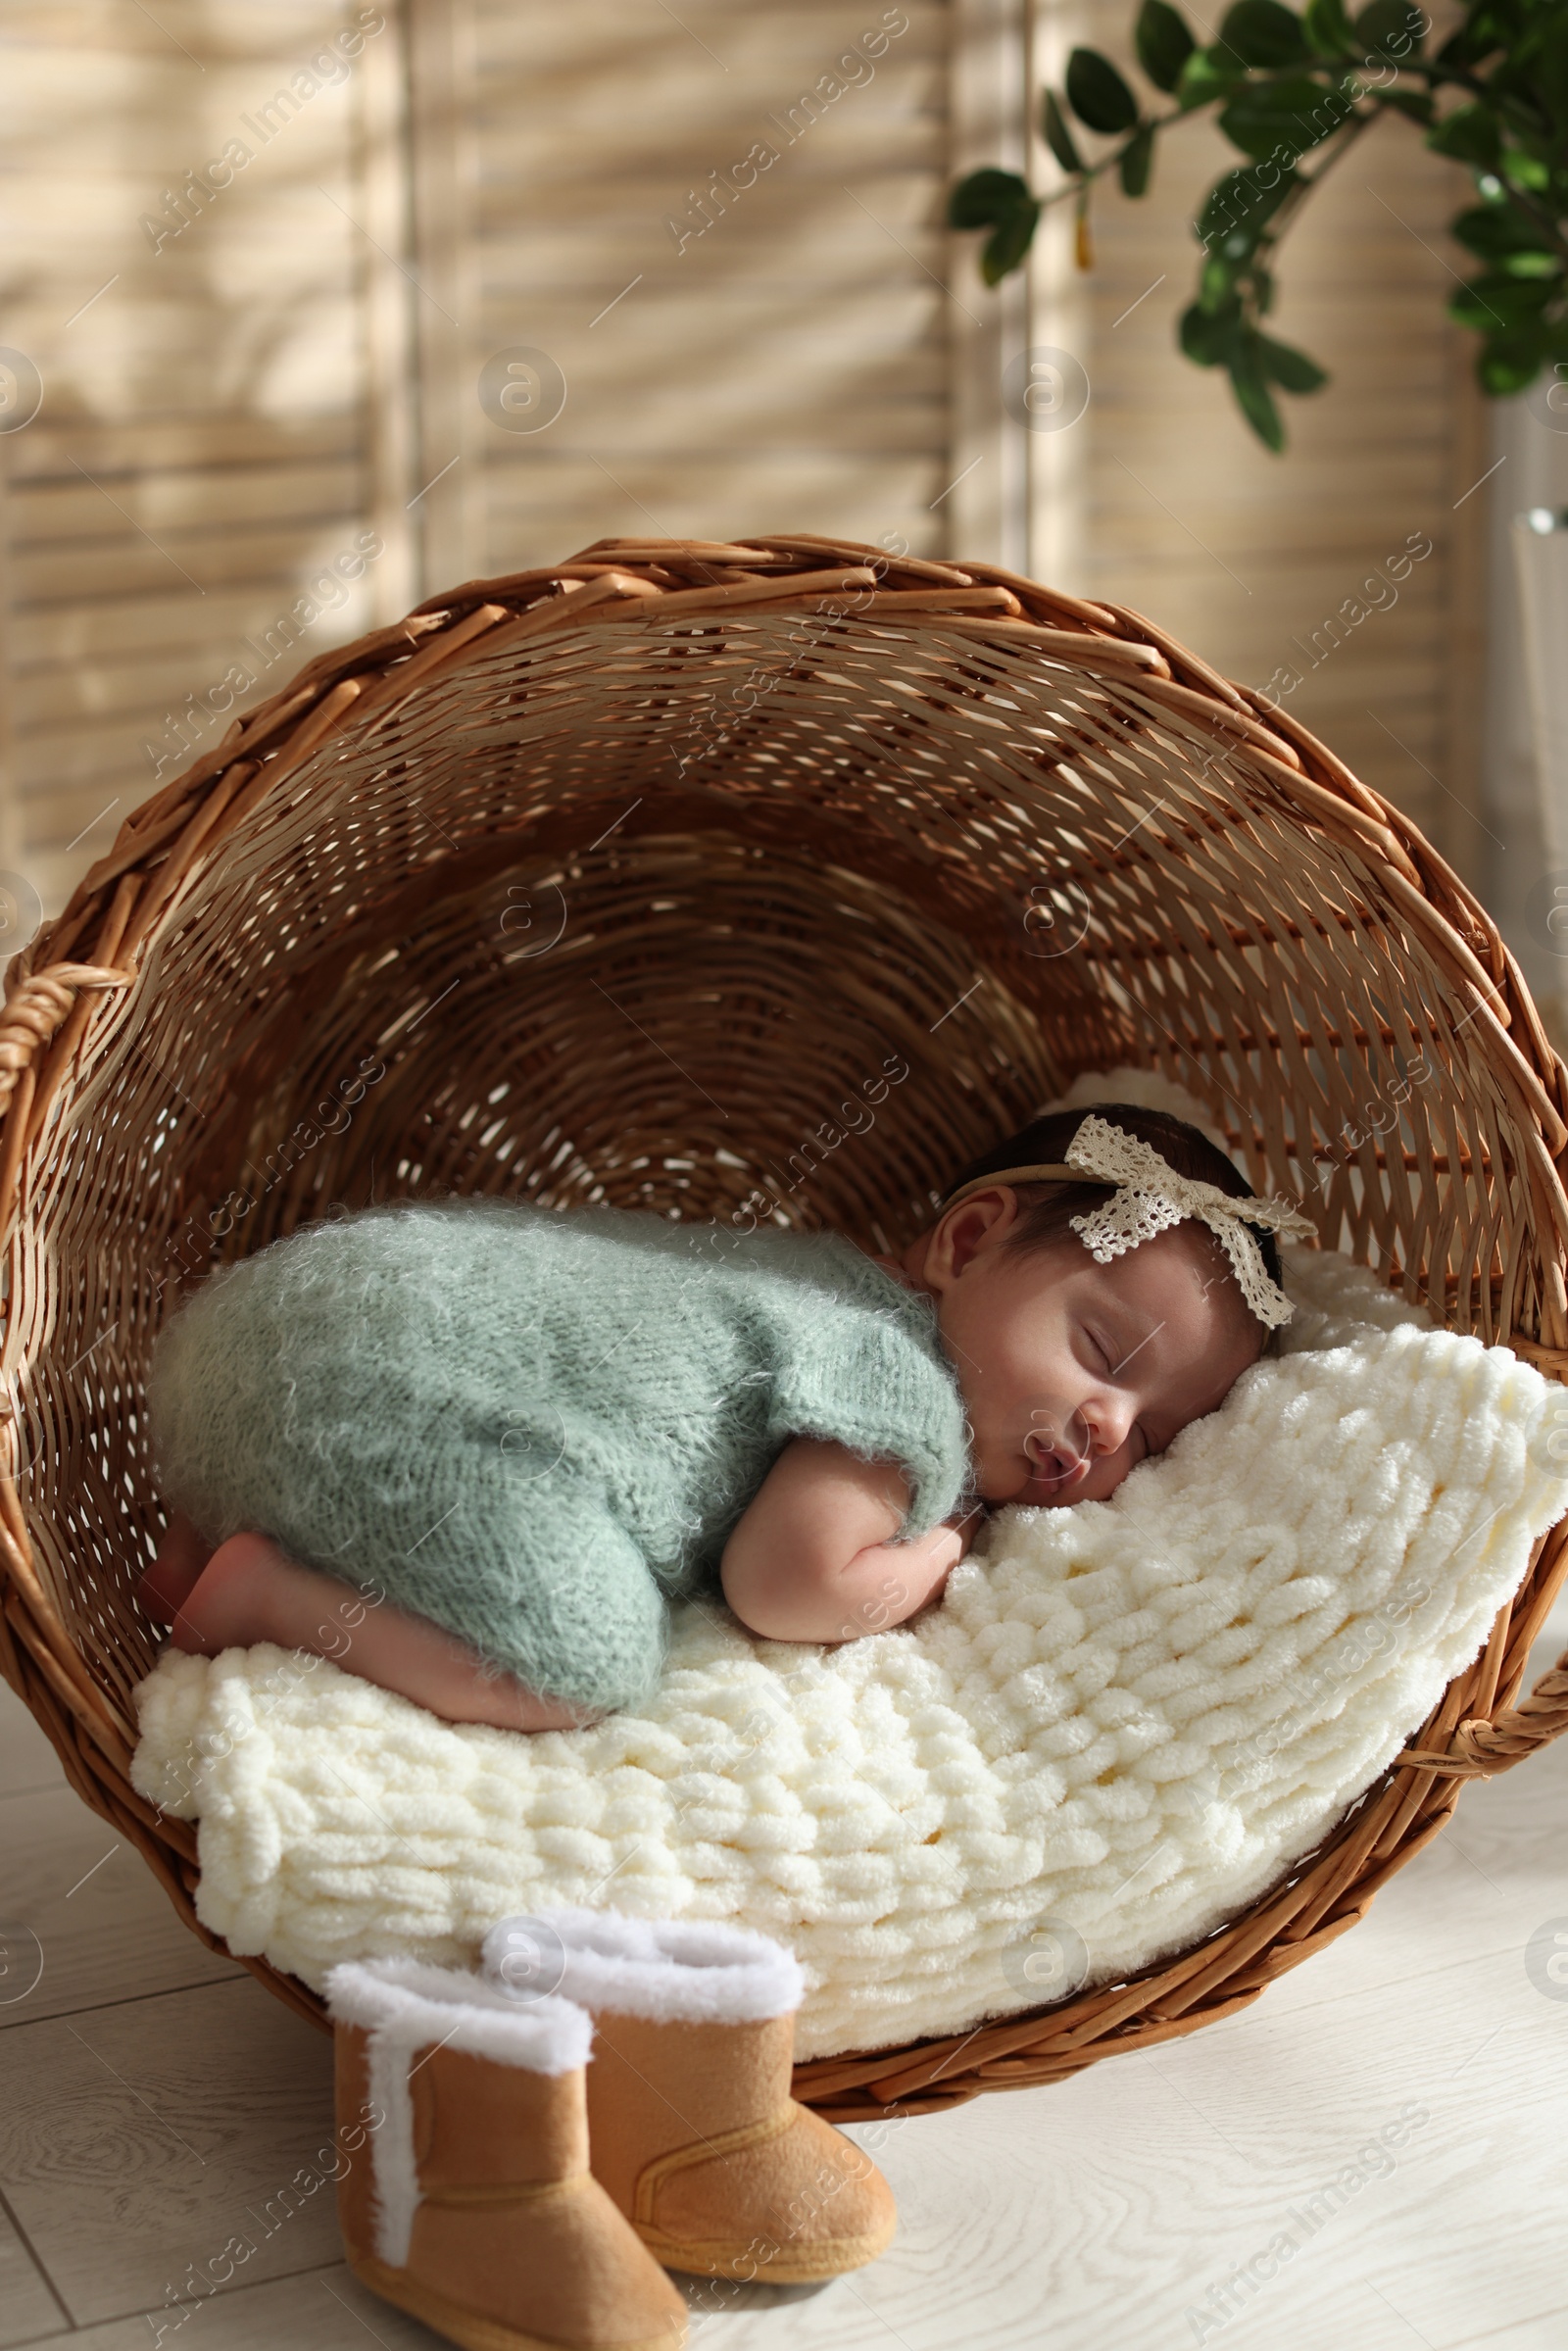 Photo of Adorable newborn baby sleeping in wicker basket at home